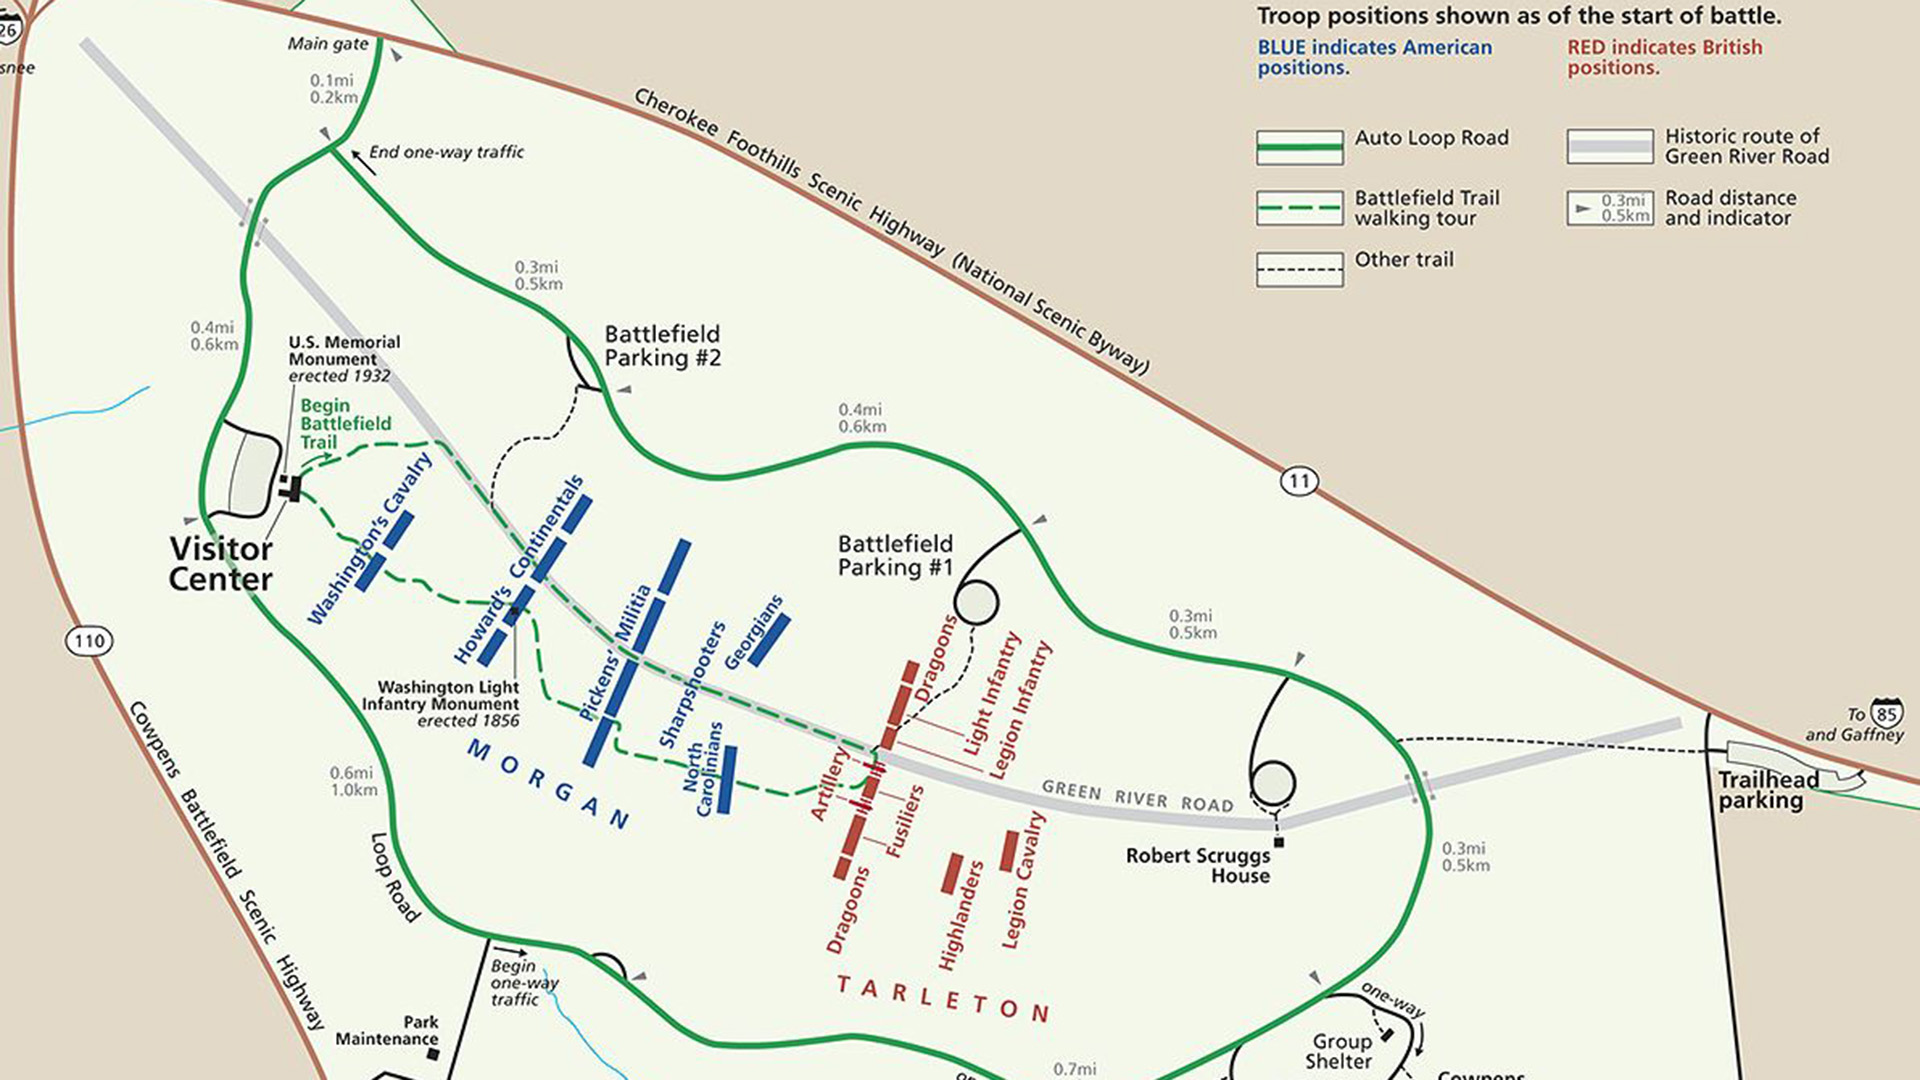 Why did the Battle of Cowpens start?